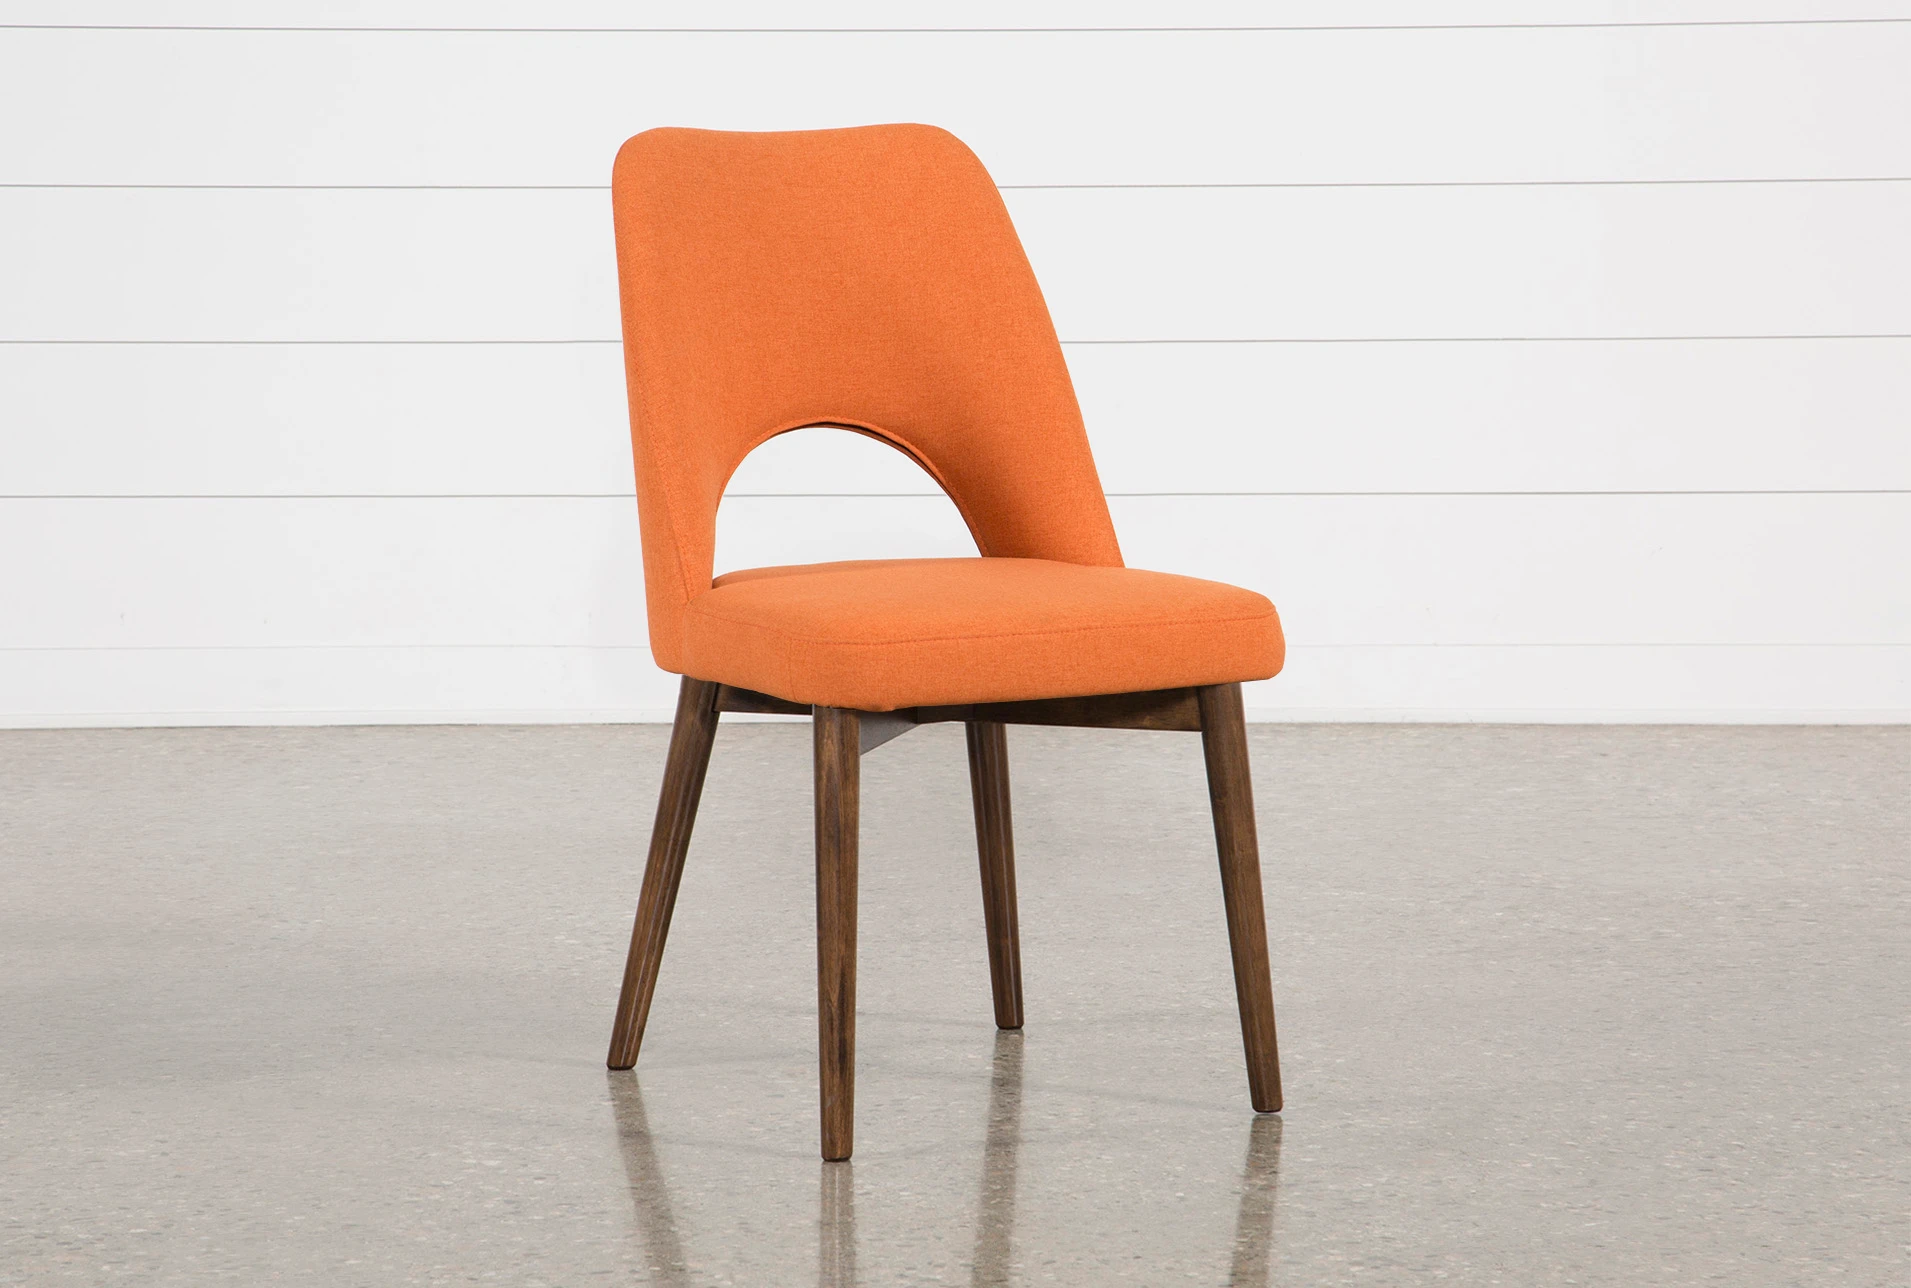 Orange Dining Room Chairs And Wall Color